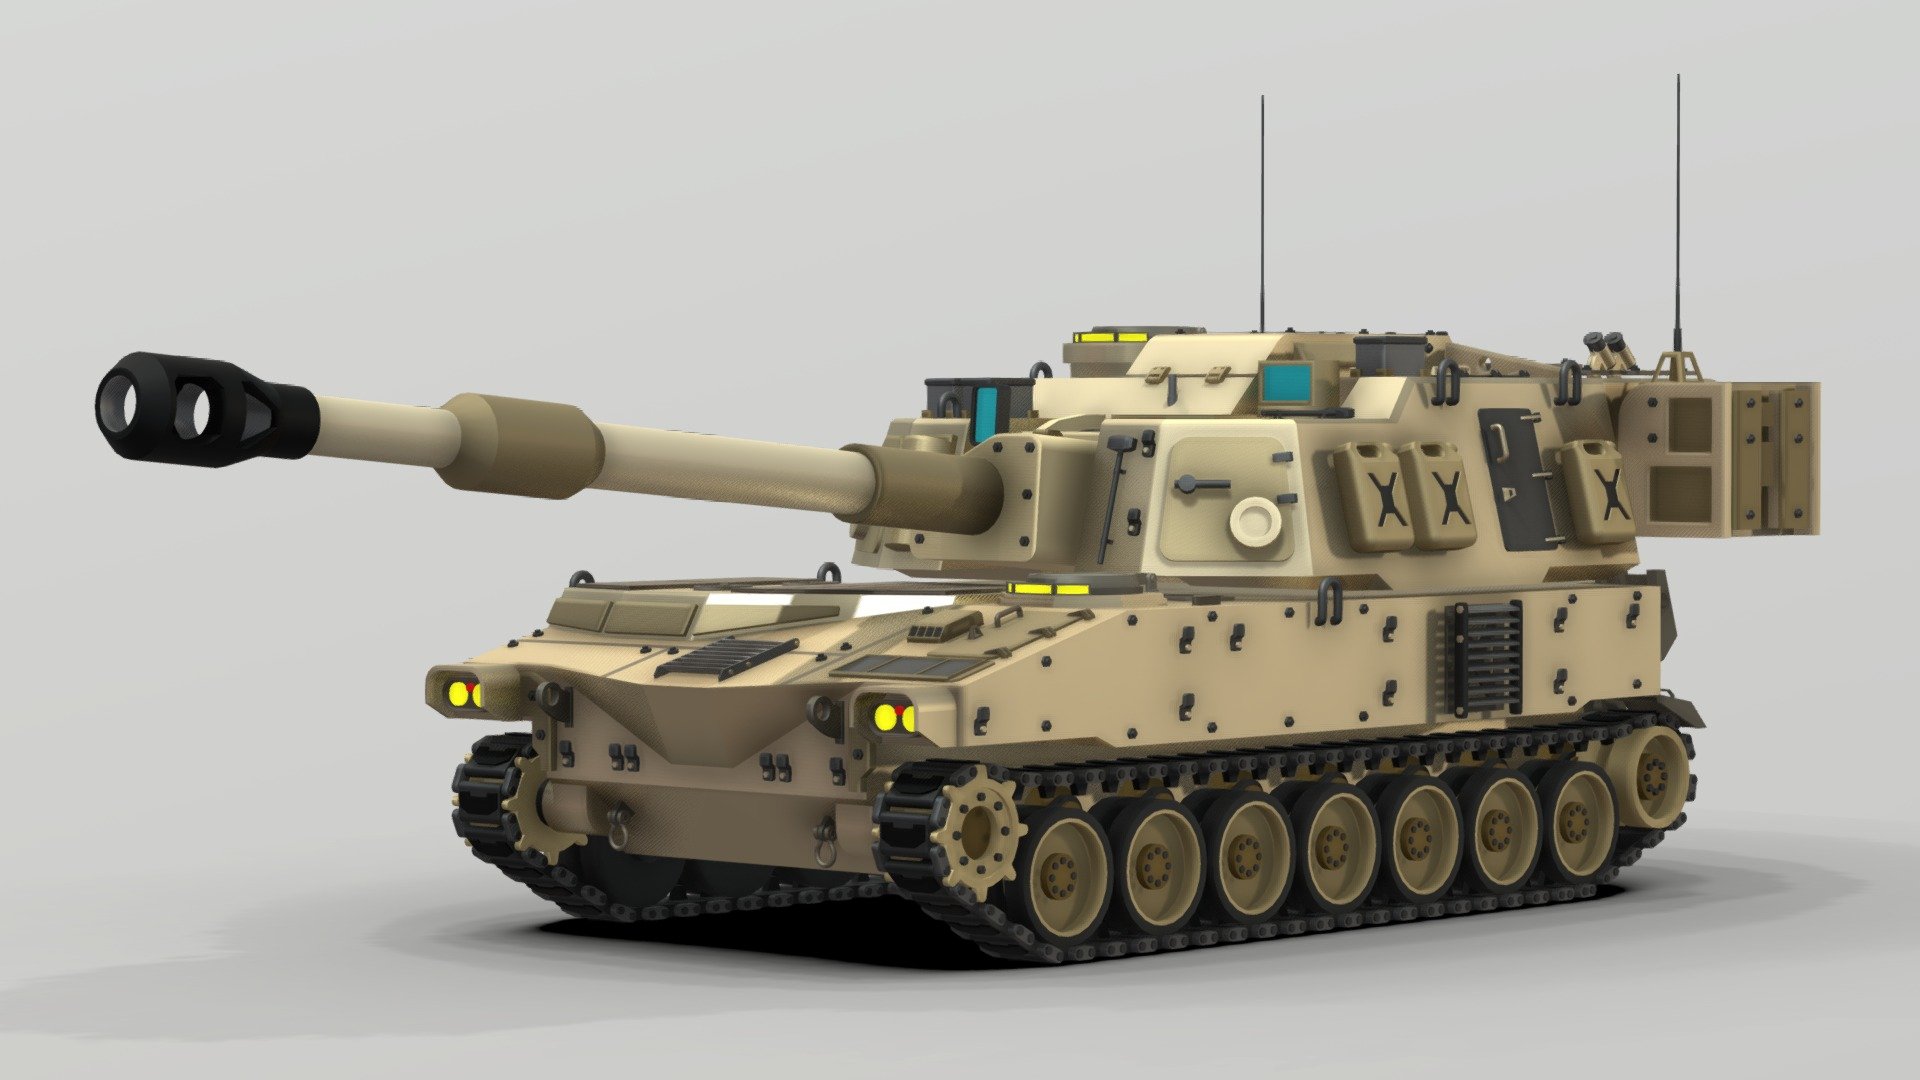 The M109 is an American 155 mm turreted self-propelled howitzer, first introduced in the early 1960s to replace the M44. It has been upgraded a number of times, most recently to the M109A7. The M109 family is the most common Western indirect-fire support weapon of maneuver brigades of armored and mechanized infantry divisions 3d model